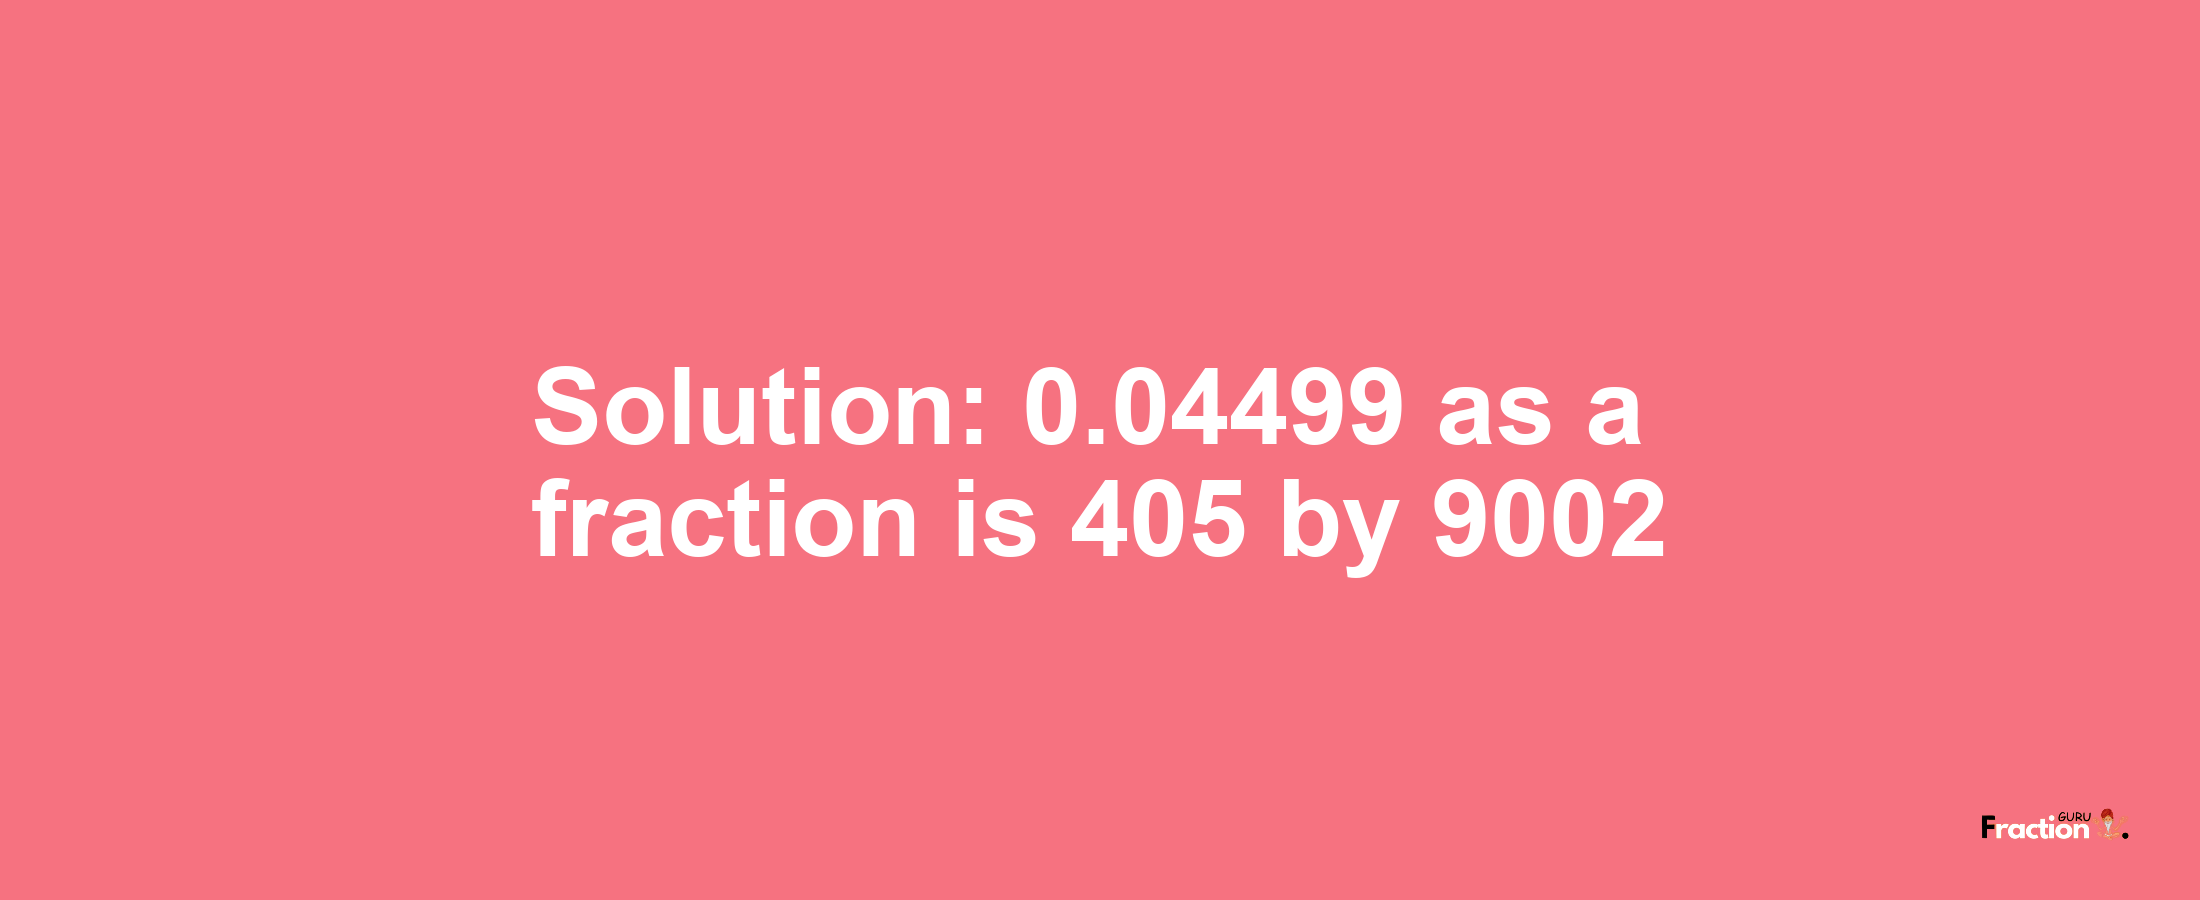 Solution:0.04499 as a fraction is 405/9002